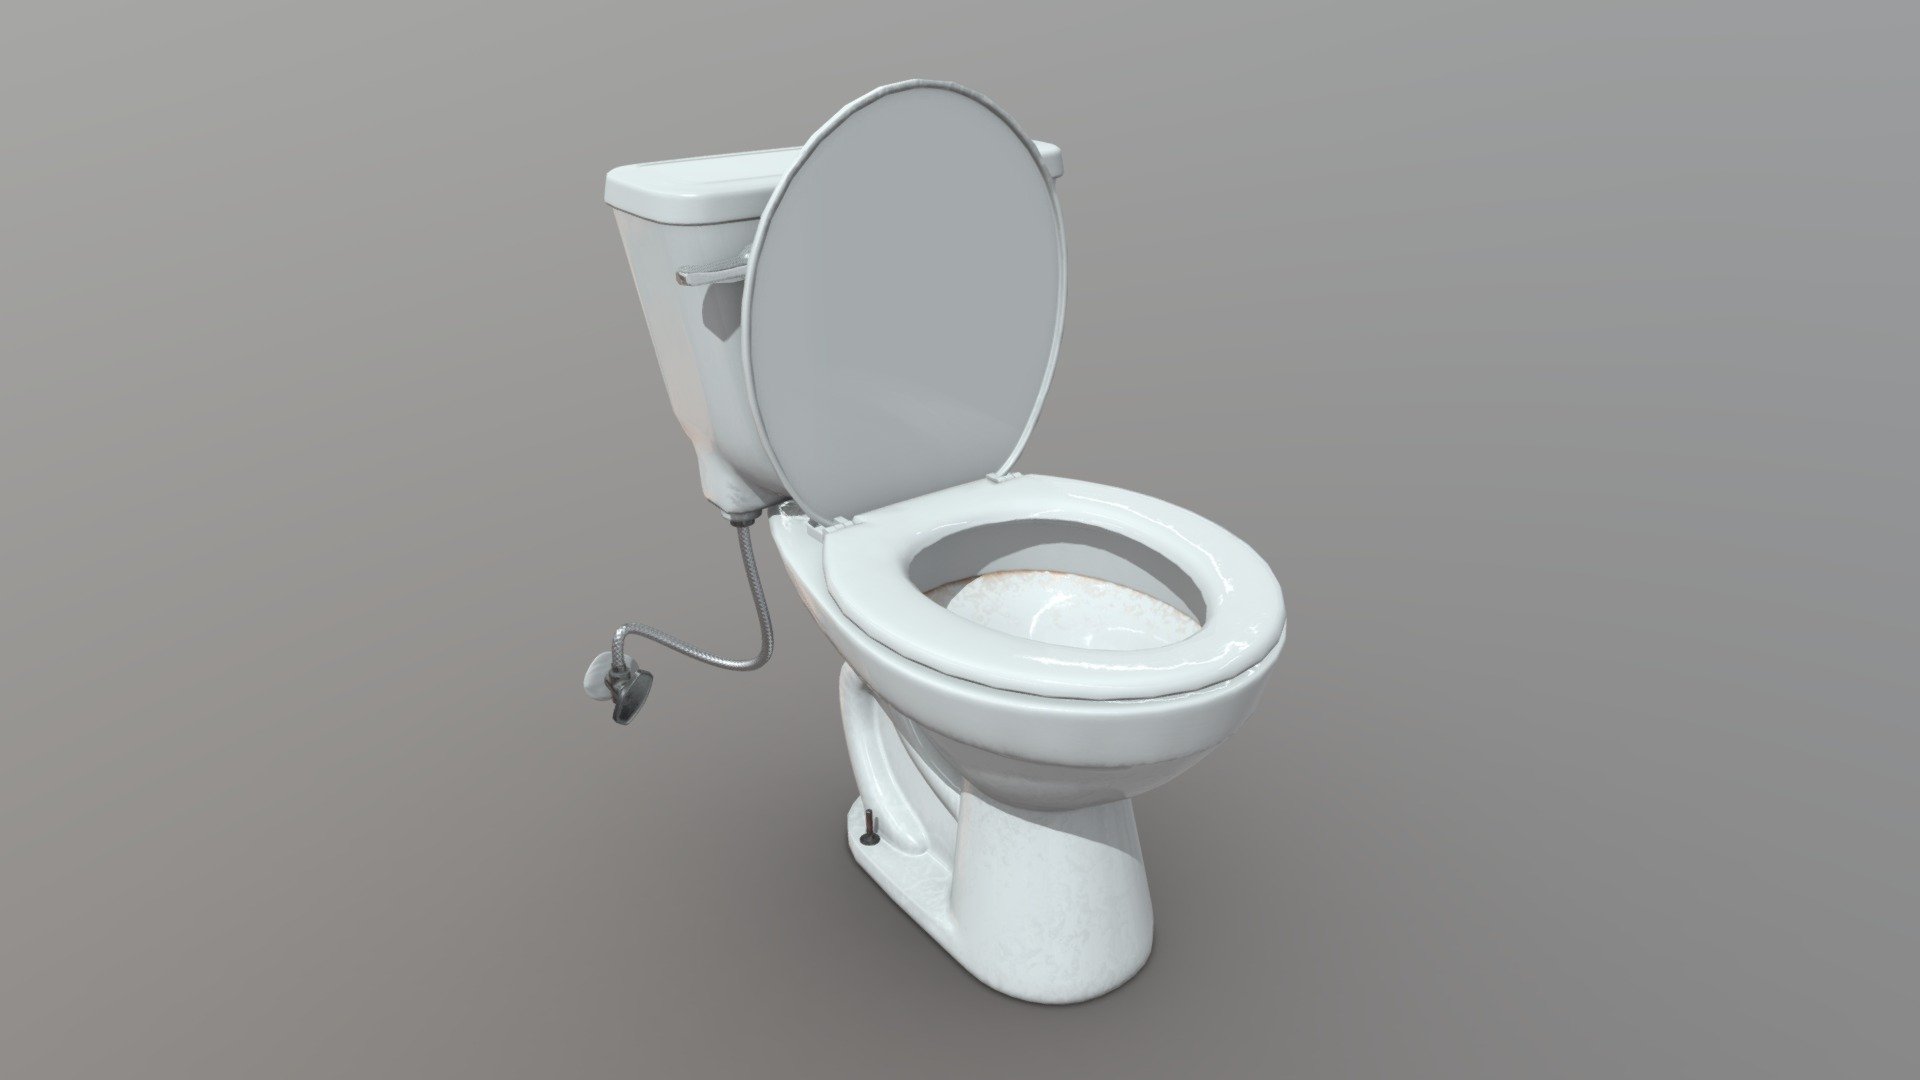 Toilet with water hook up. Toilet lid and seat are separate objects for simple manipulation.

Faces: 5,164

Quad-Only: No

LOD Groups: None

Overlapping UV: Yes

Lightmap UV: No

Material Count: 1

Texture Resolution: 2048x2048x8 PNG (16bit normal) - Toilet - Download Free 3D model by HippoStance 3d model